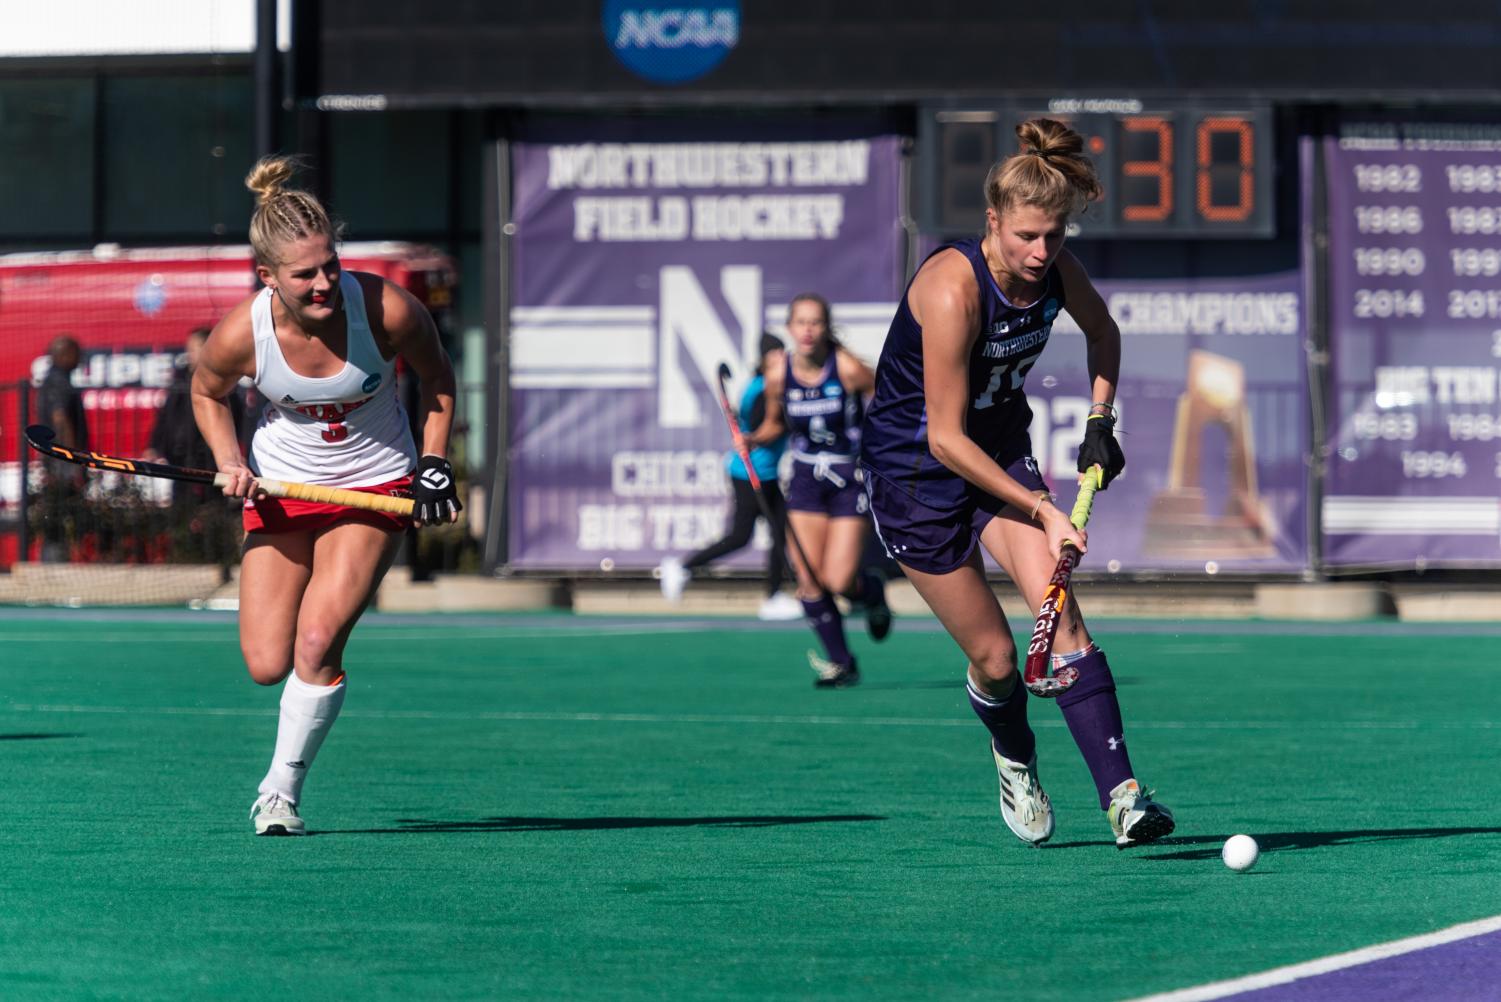 A field hockey player in a purple jersey runs while keeping the ball away from a player in a white jersey.